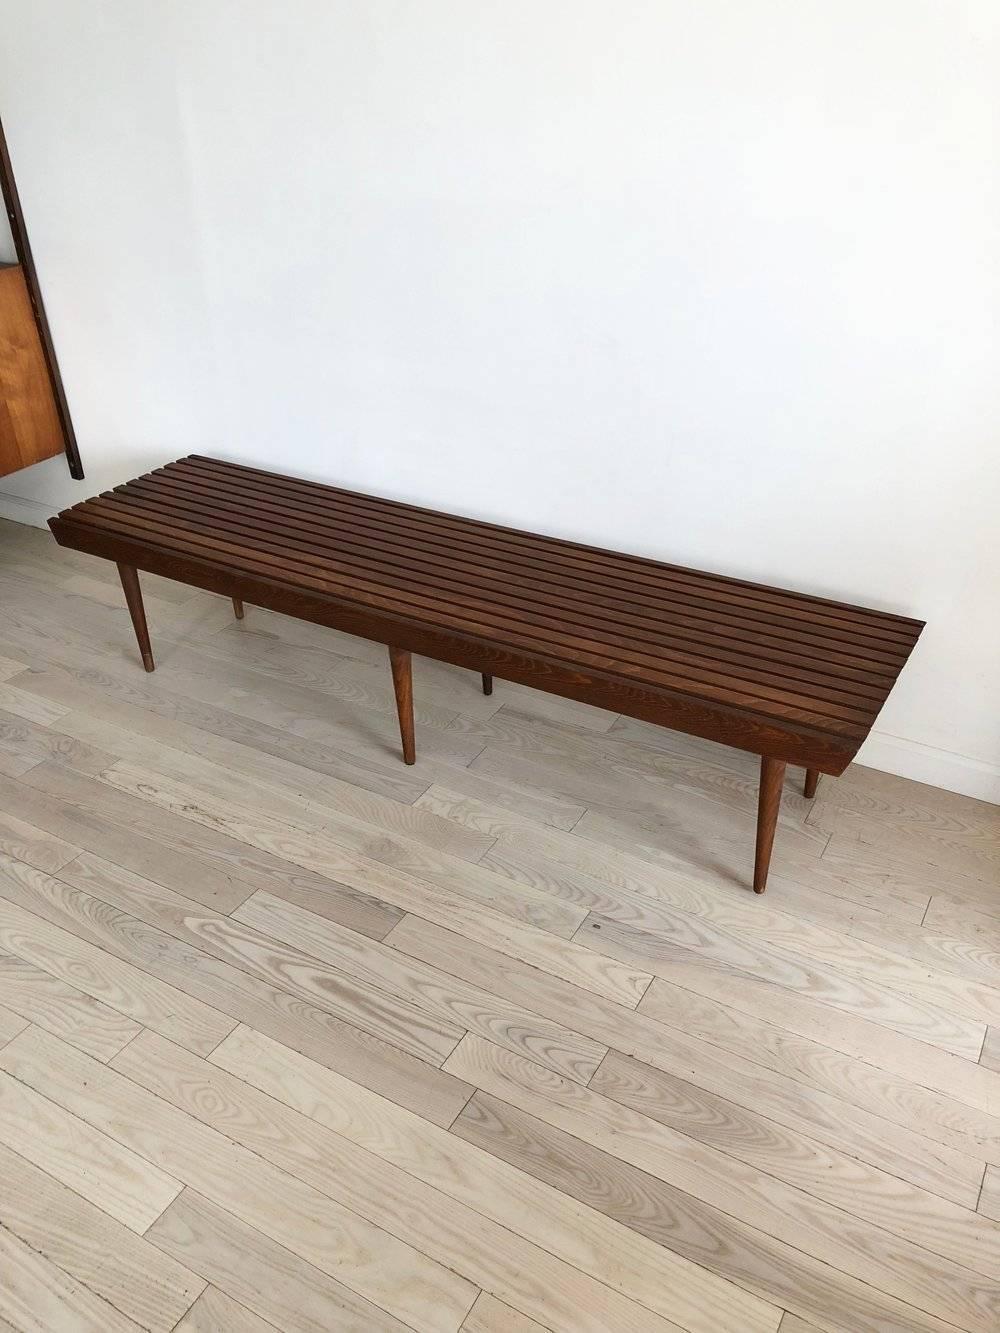 Amazing condition six legged and 6 foot long walnut slat bench. From the 1960s made in Yugoslavia. Great used as a coffee table or a bench for sitting. Excellent condition, sturdy and strong. 

Measure: 16